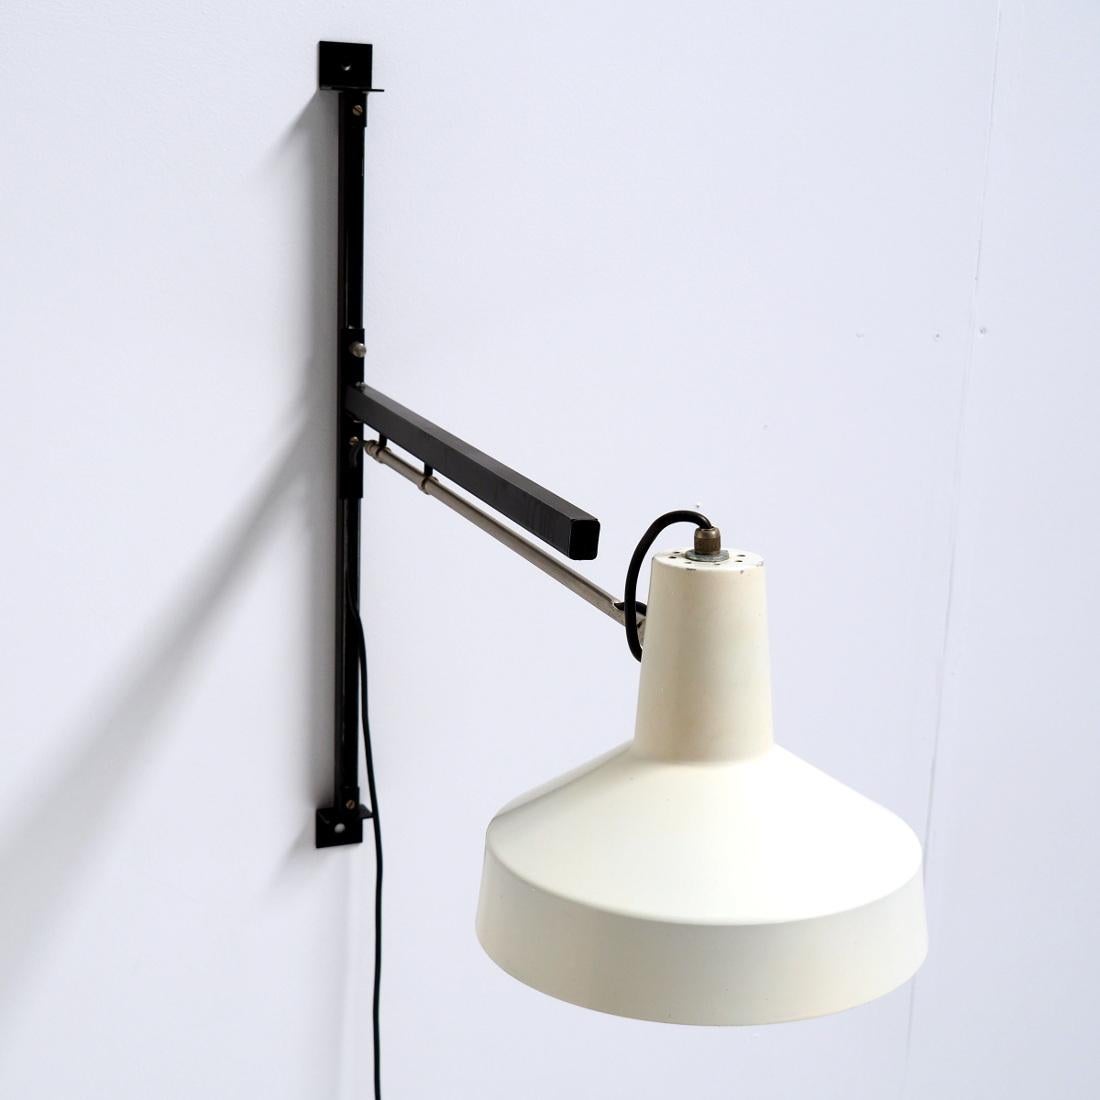 Dutch Wall Lamp by Niek Hiemstra for Hiemstra Evolux